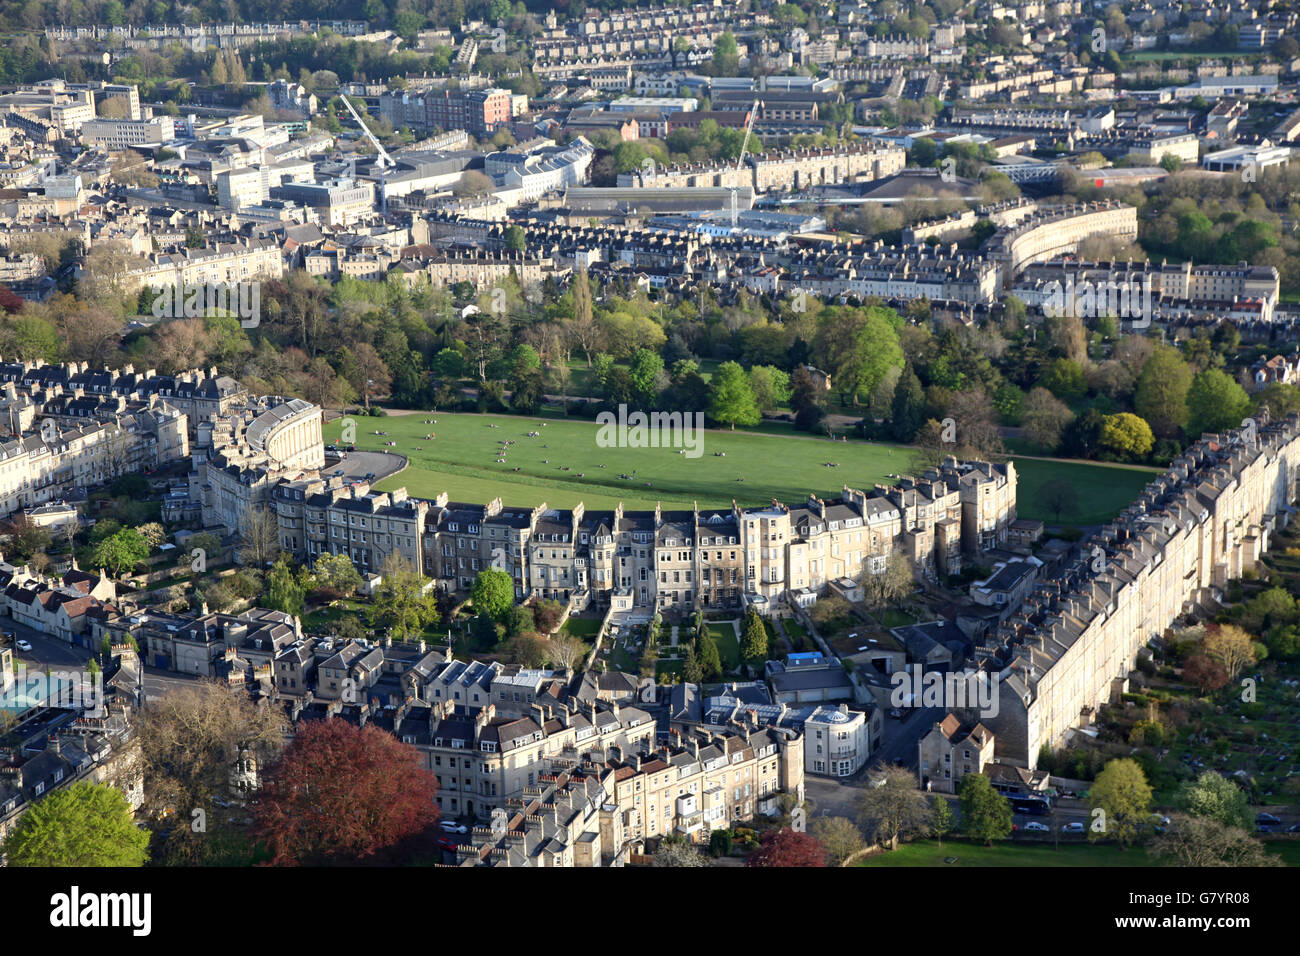 Looking down on the Royal crescent Bath with some of bath City shown in the background Stock Photo